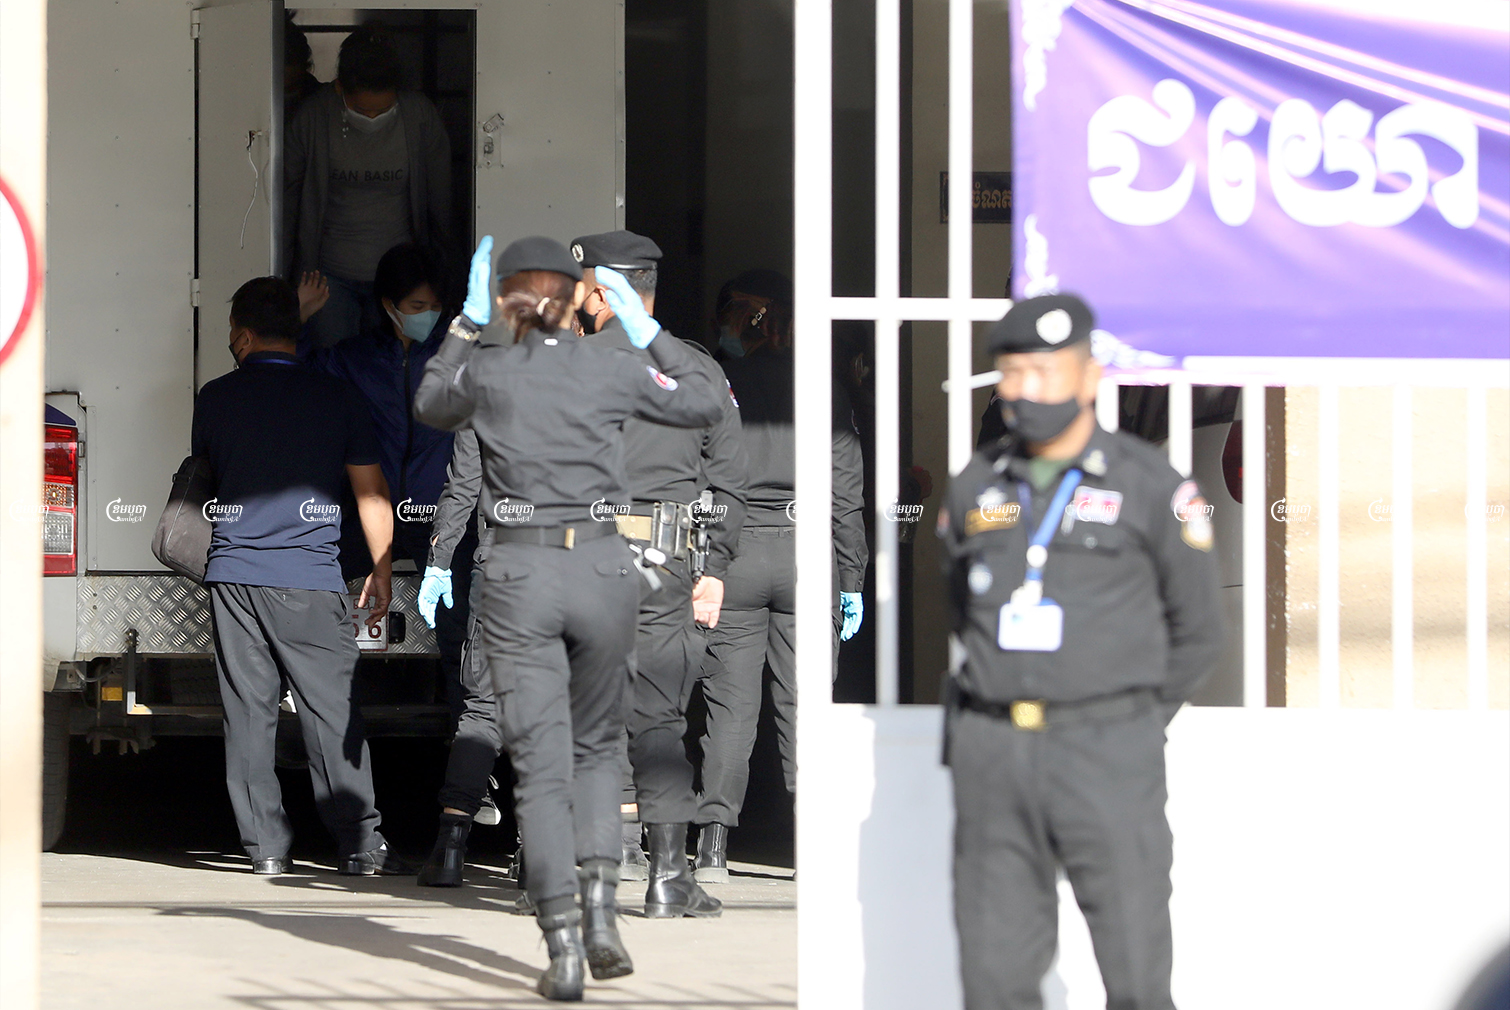 NagaWorld union members arrested for their involvement in the peaceful strikes arrived Monday at the Municipal Court of Phnom Penh for questioning, January 3, 2022. CamboJA/ Pring Samrang